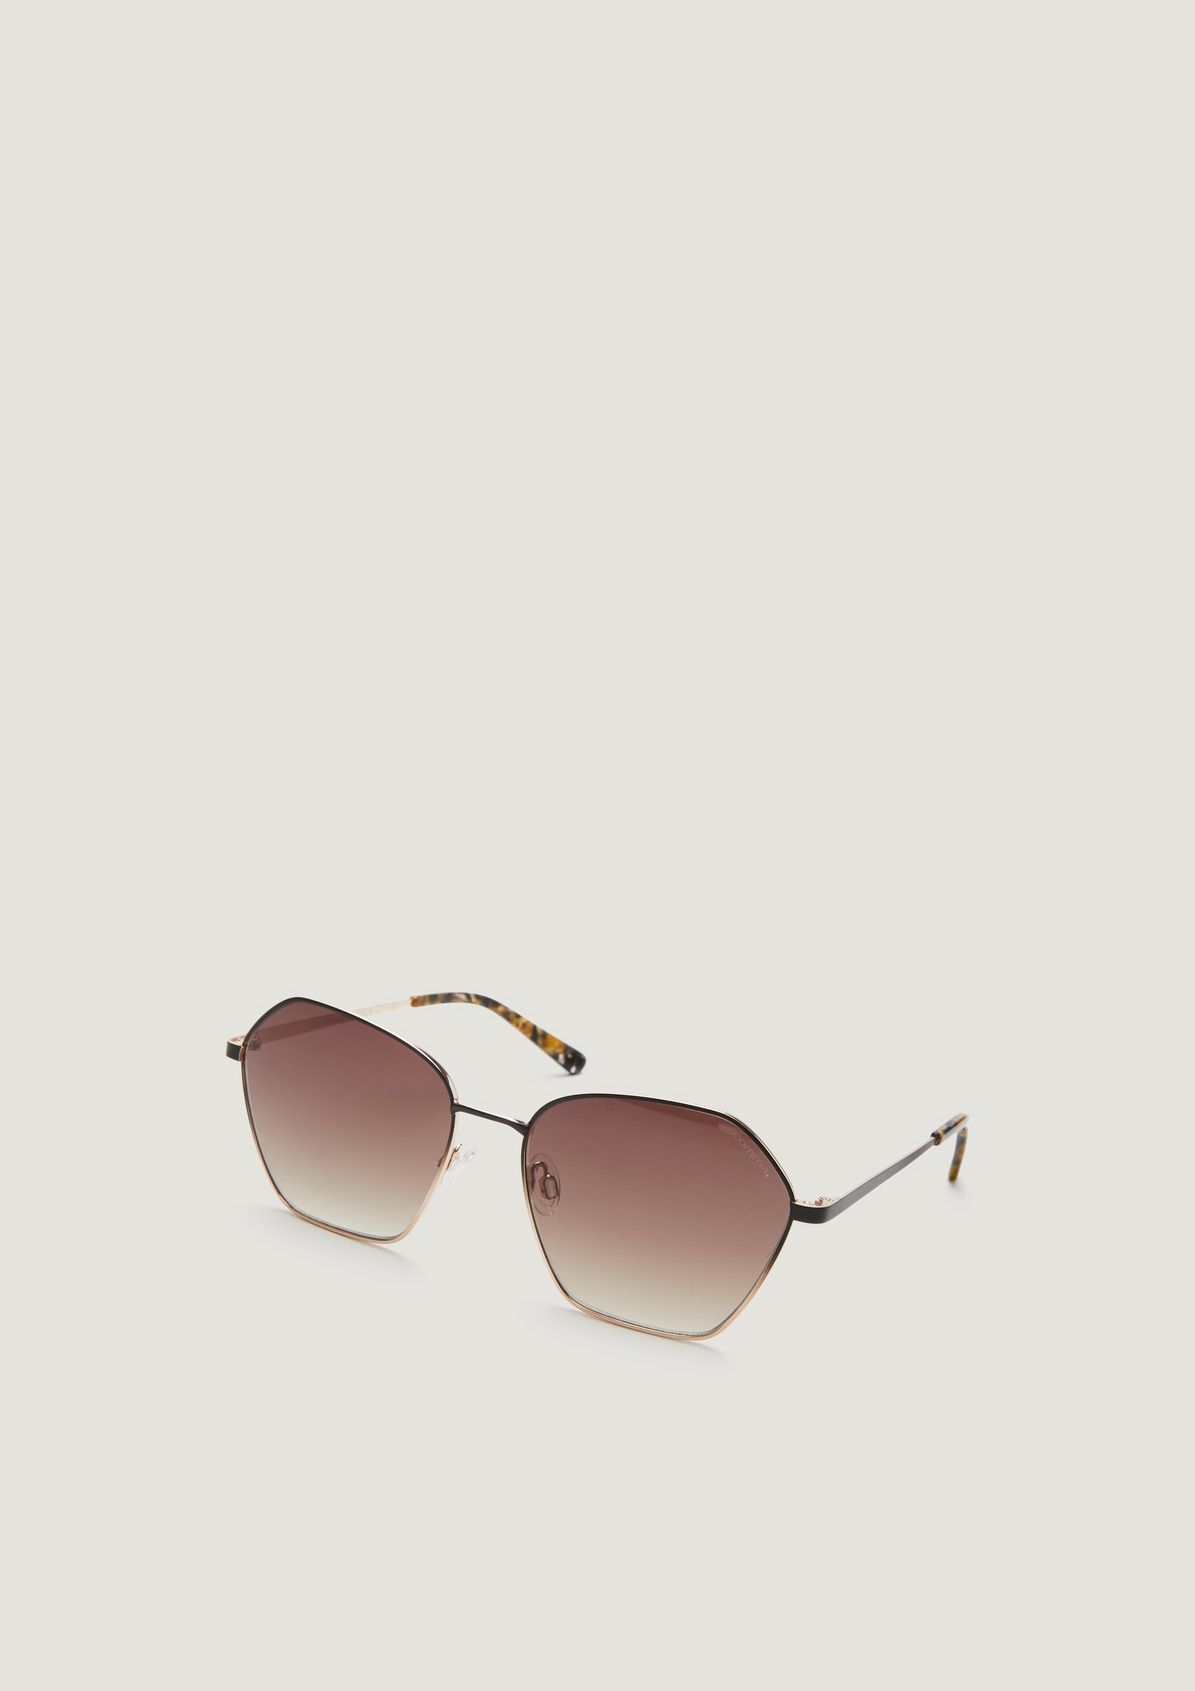 Sunglasses in an angular design from comma